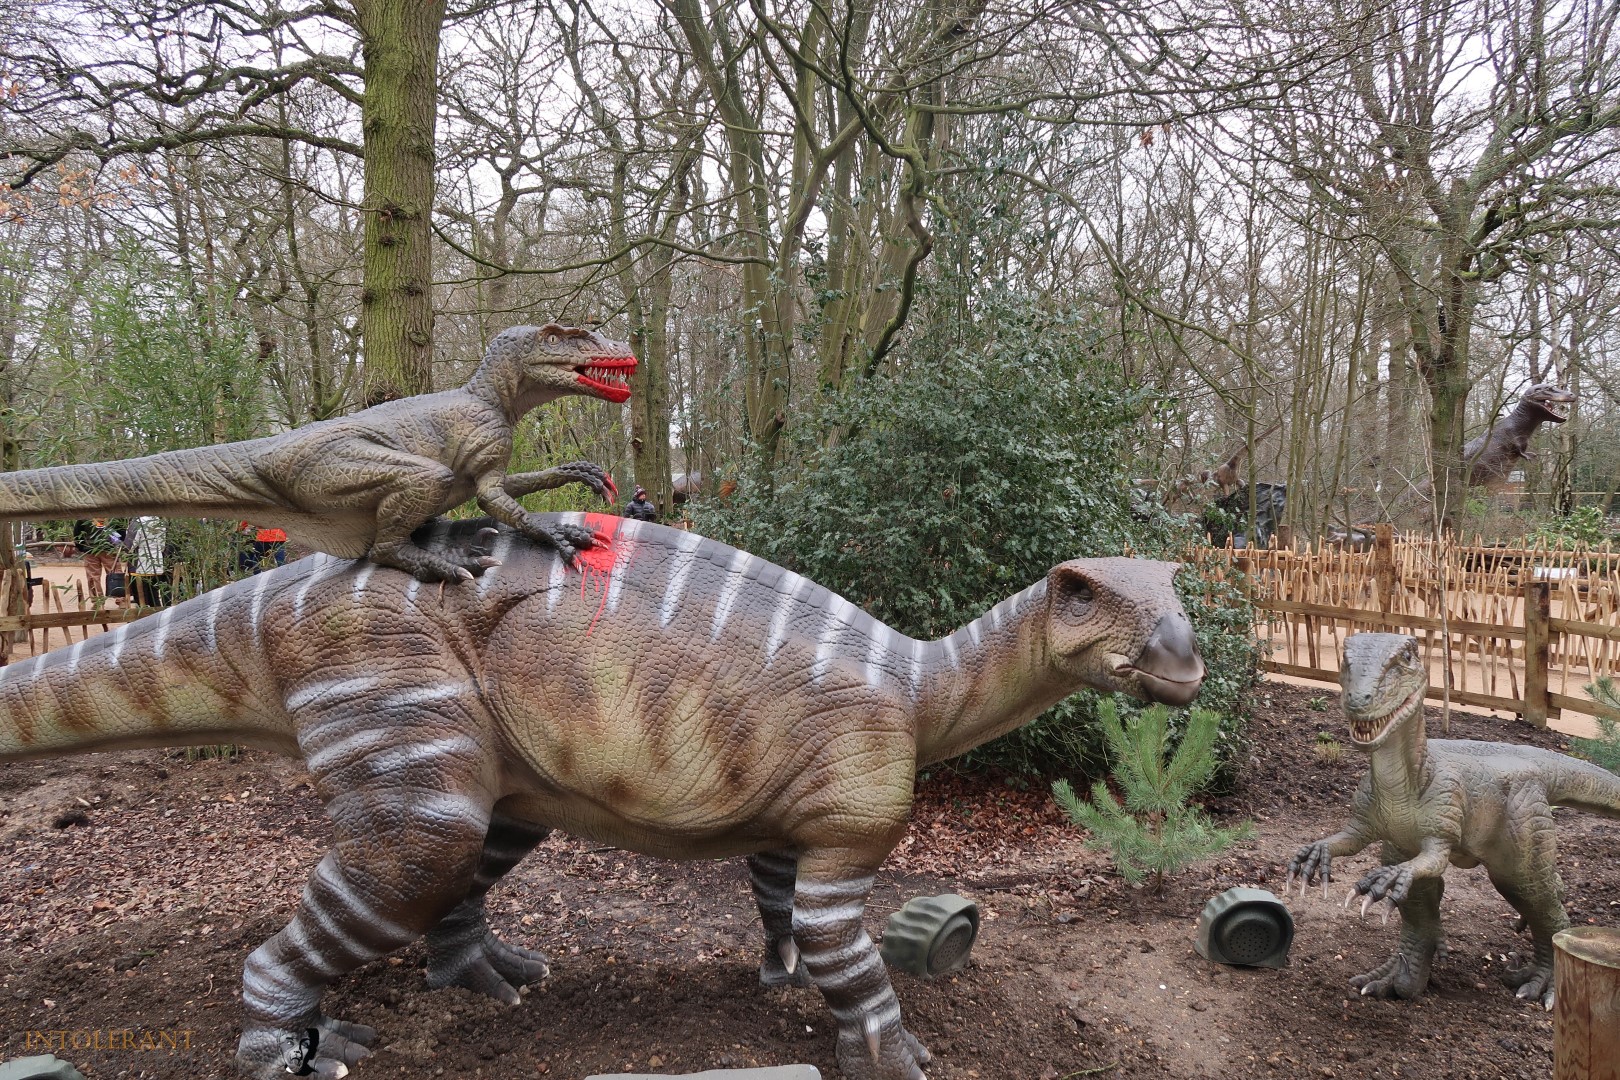 World of Dinosaurs - part of Paradise Wildlife Park! It's an enclosure packed with 30 life size, moving and animated dinosaurs, featuring T-Rex, Stegosaurus, Tricerotops and more! It's a wonderful family day out with lots to explore! www.intolerantgourmand,com